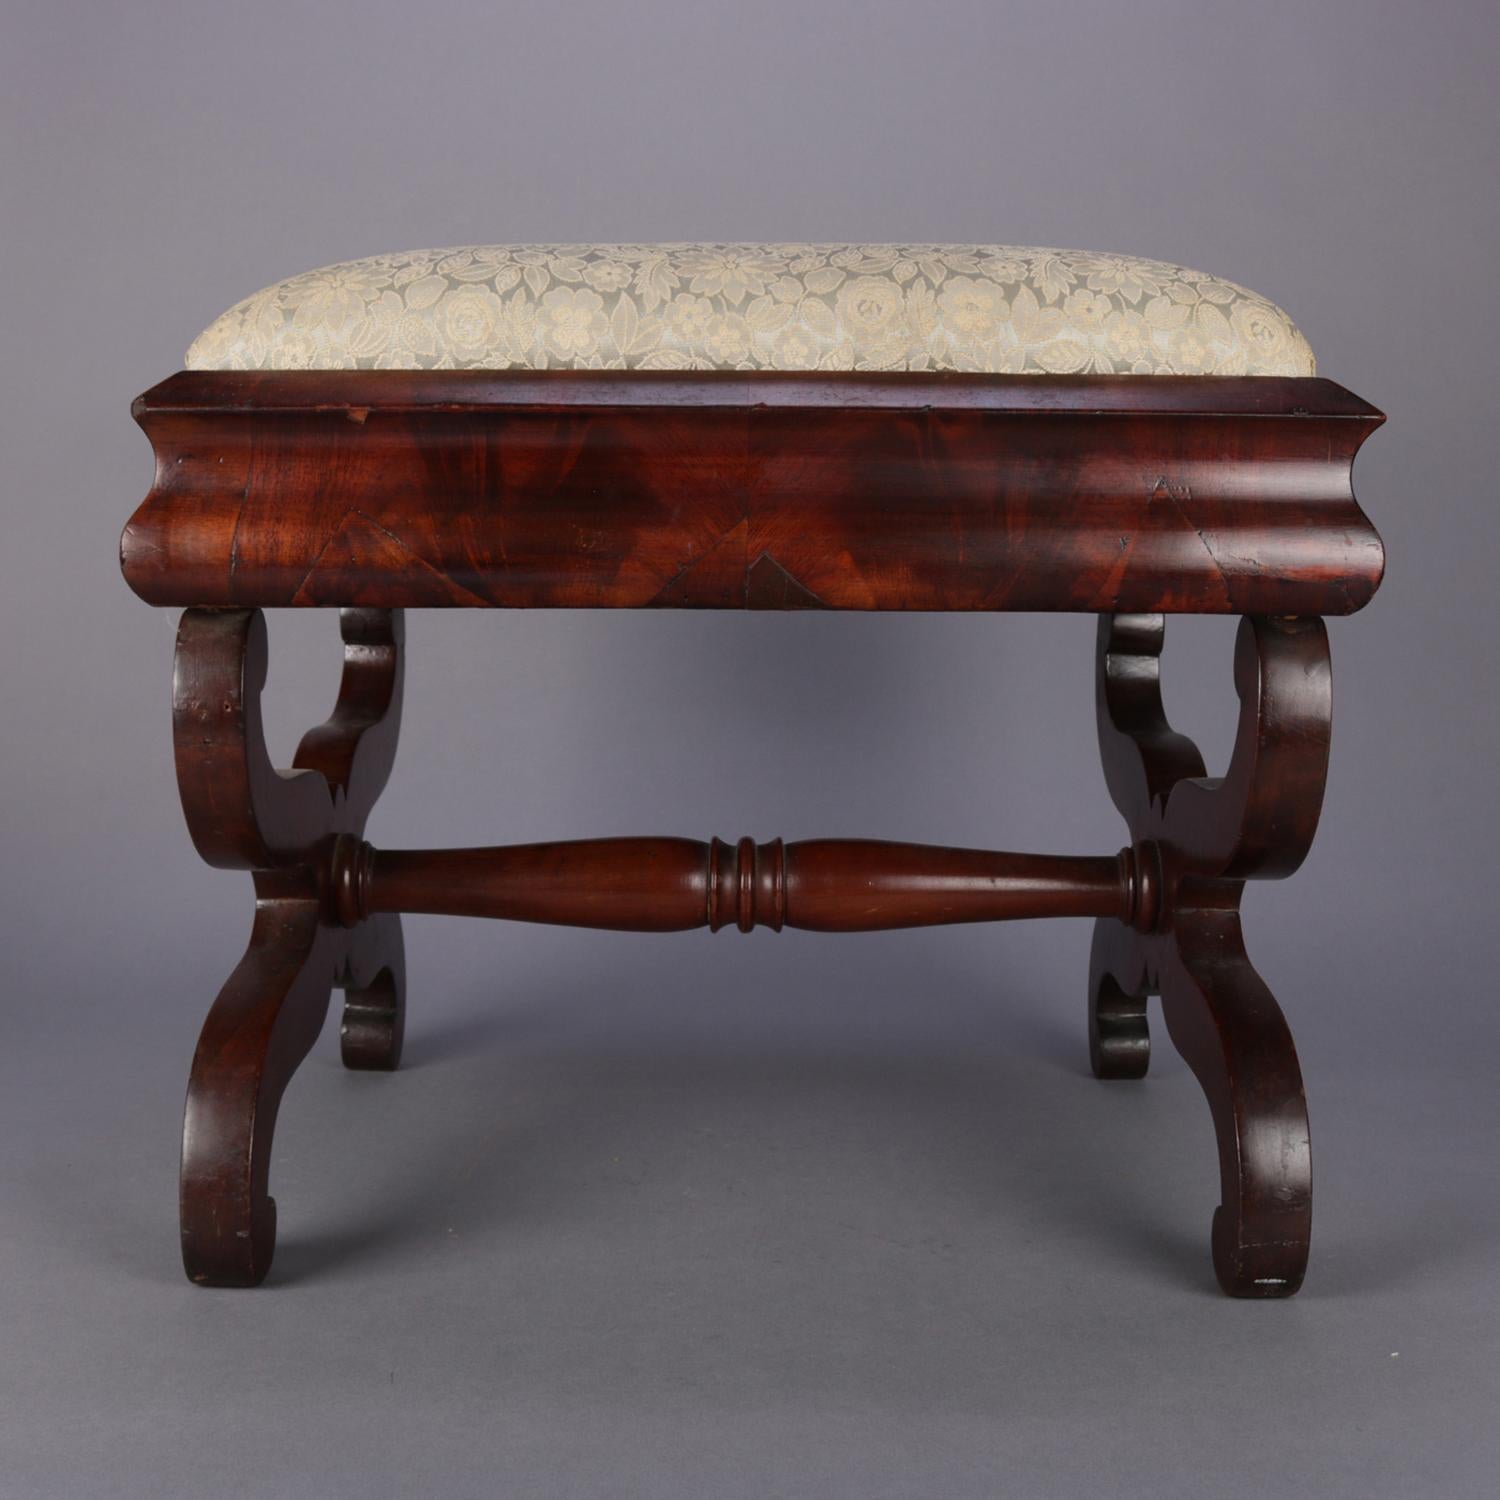 An antique flame mahogany American Empire footstool featuring upholstered cushion seated in ogee frame over s-scroll trestle base with turned stretcher, circa 1840

Measures: 16.75